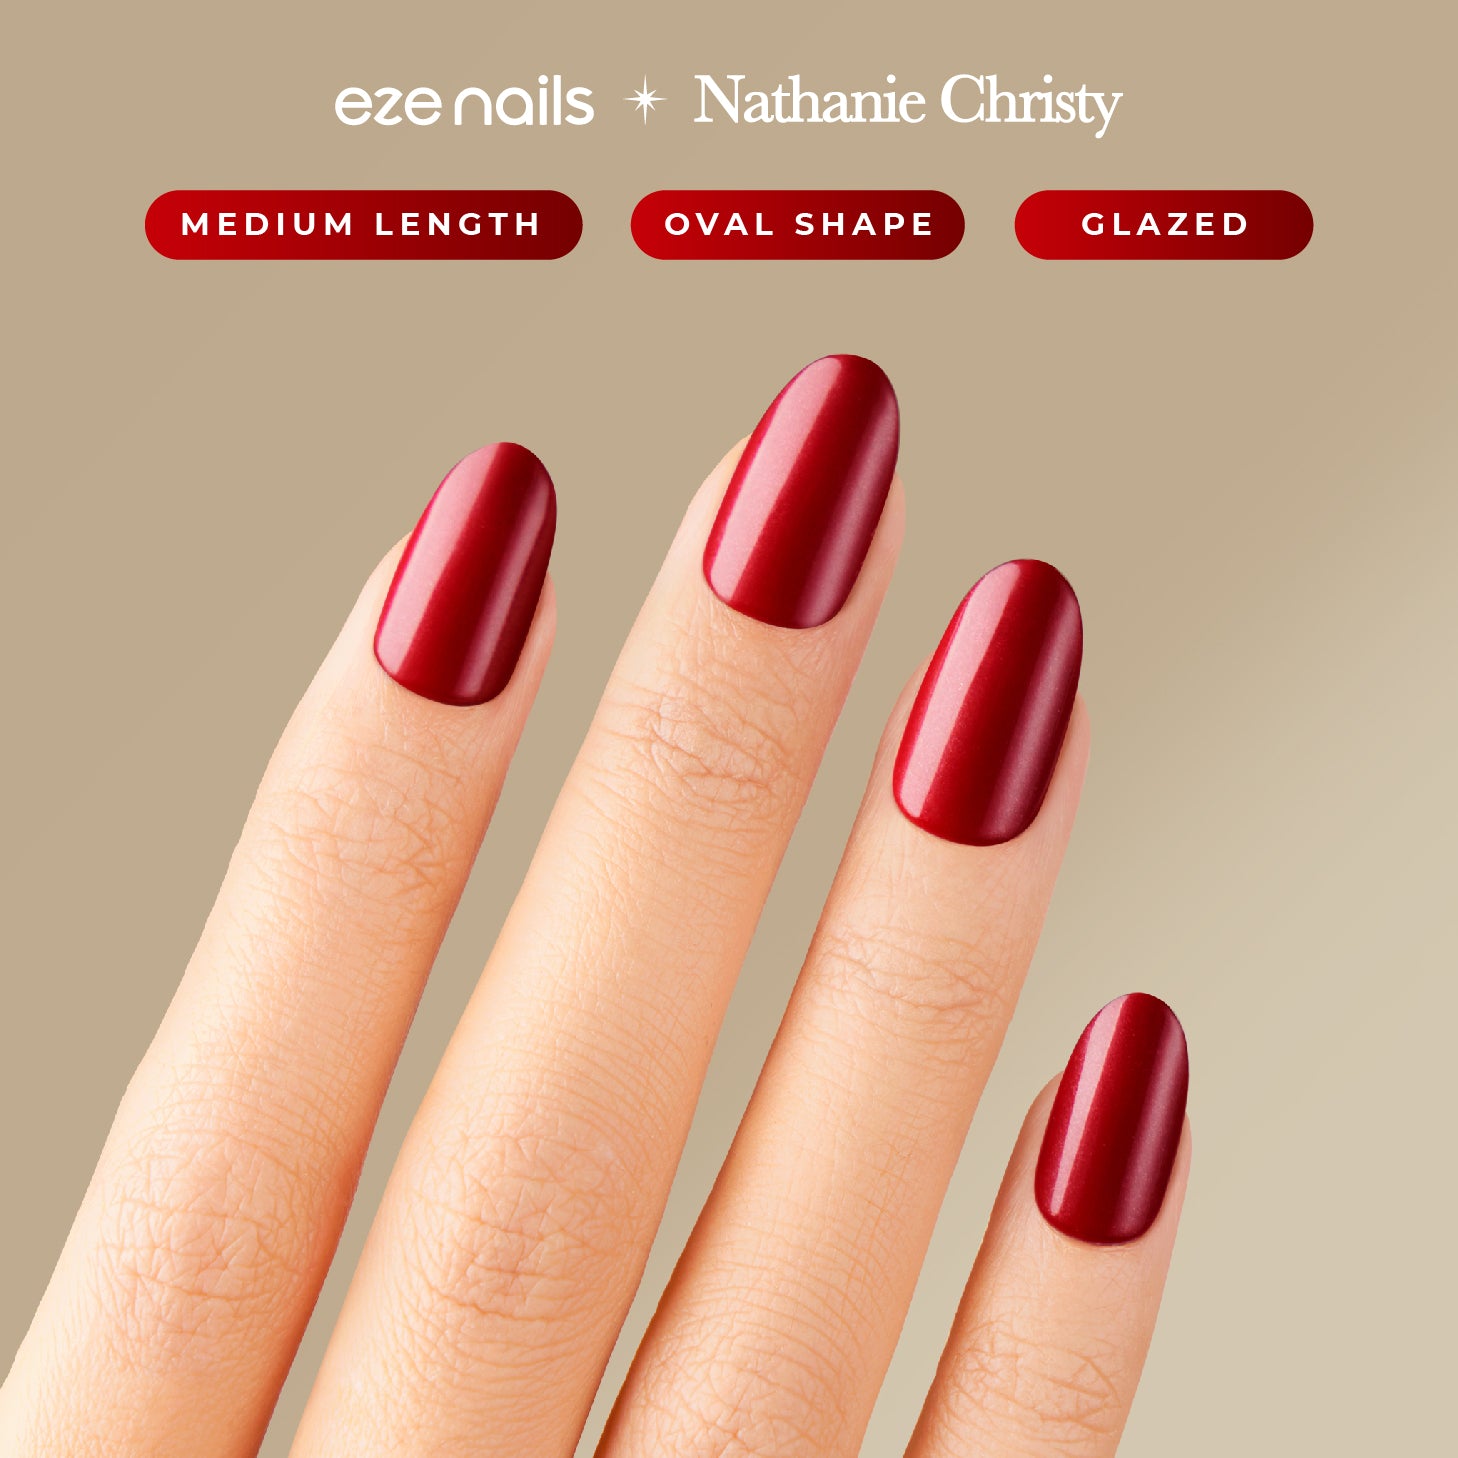 Eze Nails x Nathanie Christy - Watch Me In Red Spot on Manicure (Kuku Tempel Tangan)